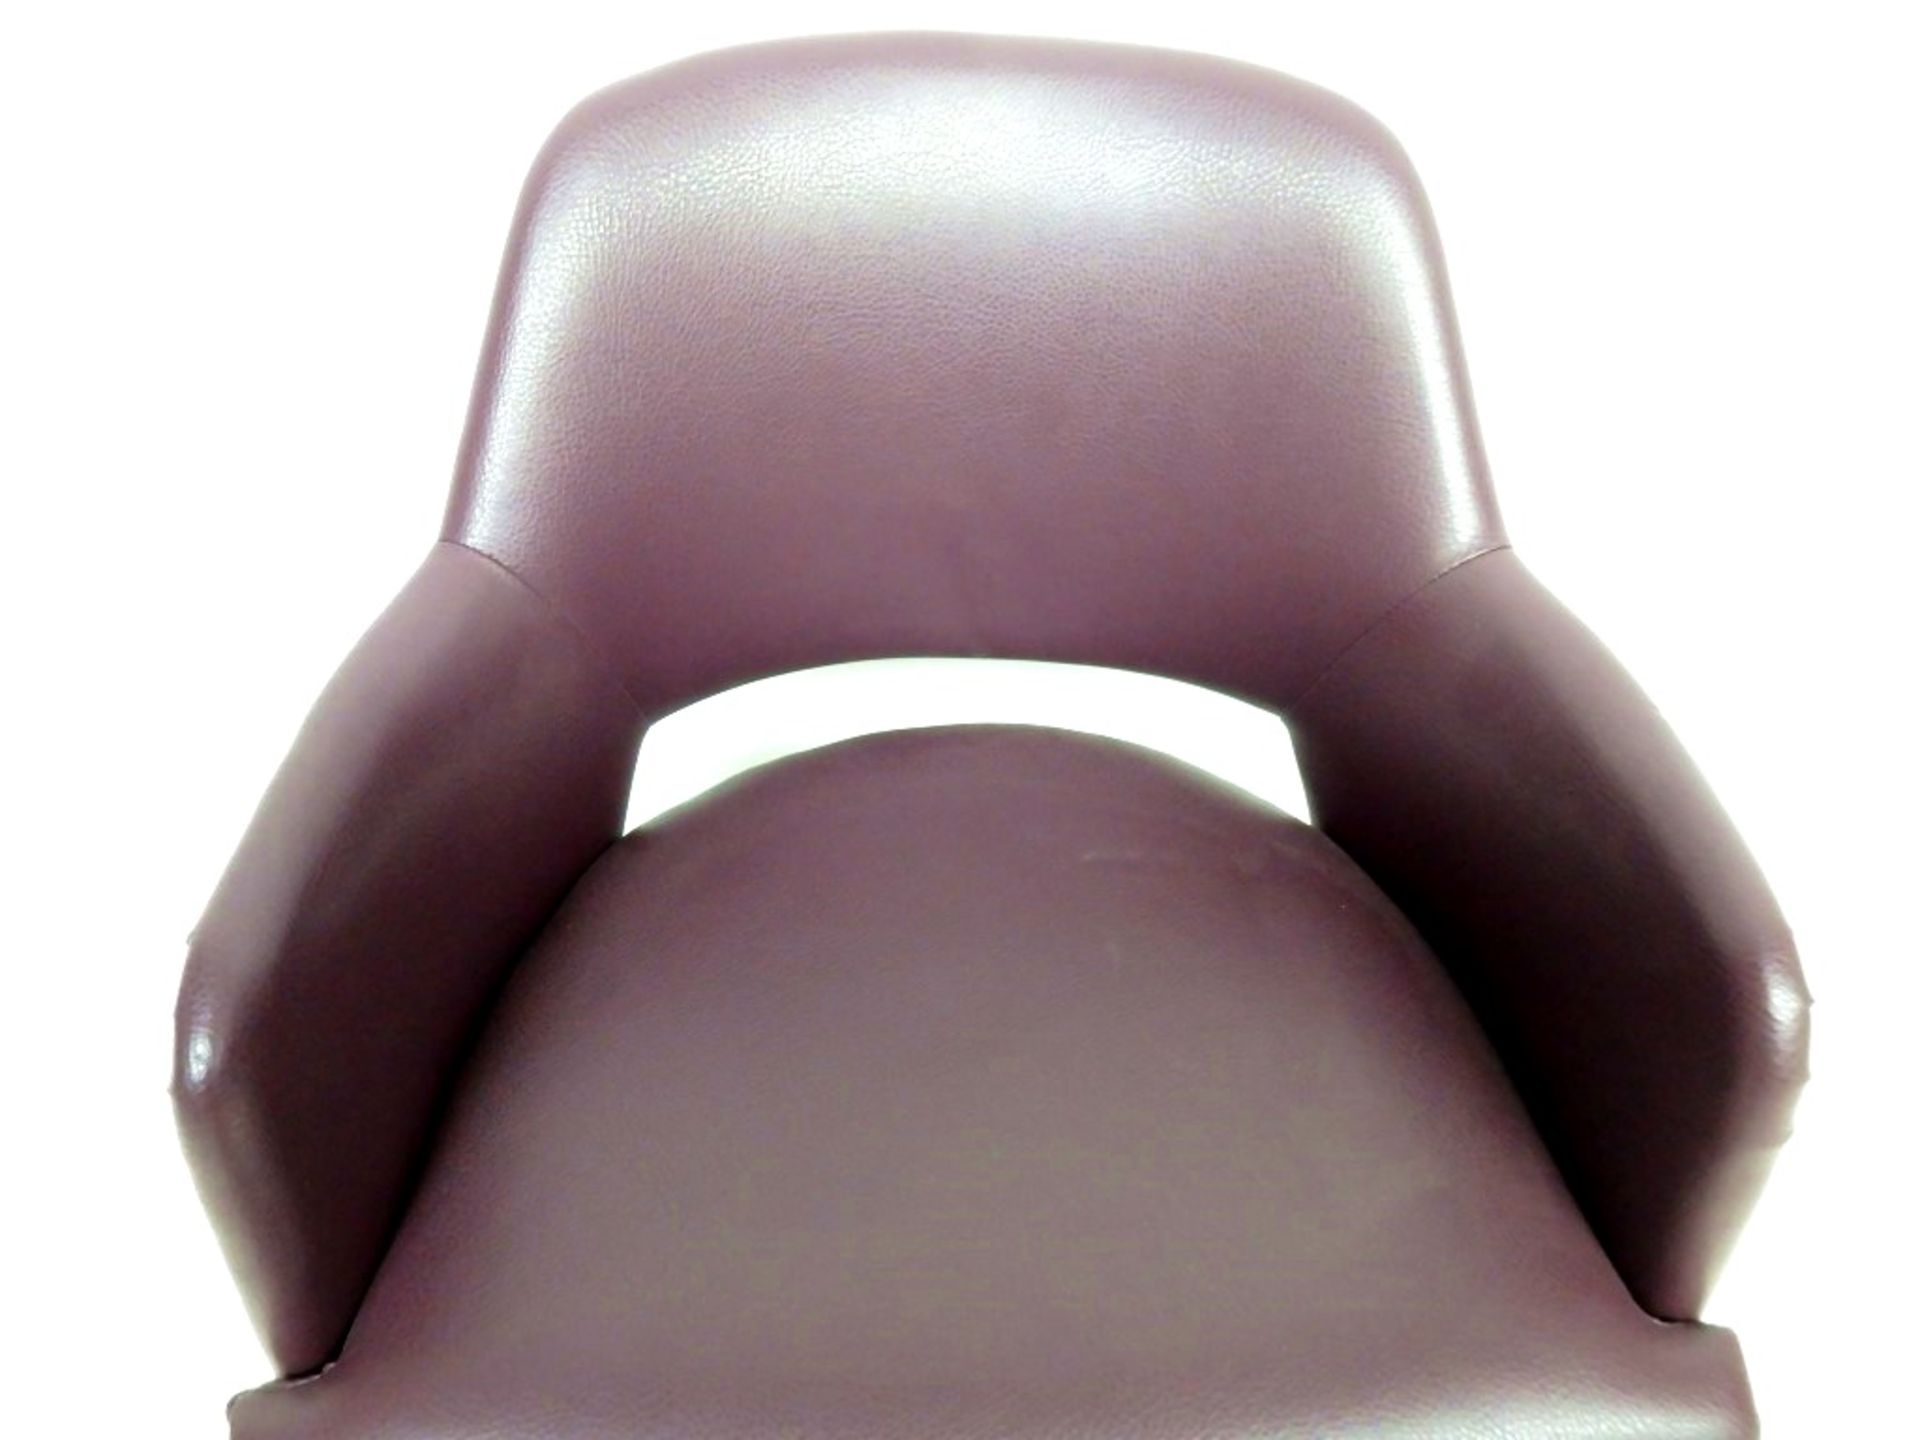 1 x Low Profile Swivel Chair Upholstered In A Rich Plum Leather - Dimensions: W60 x D50 x H62cm - - Image 3 of 4